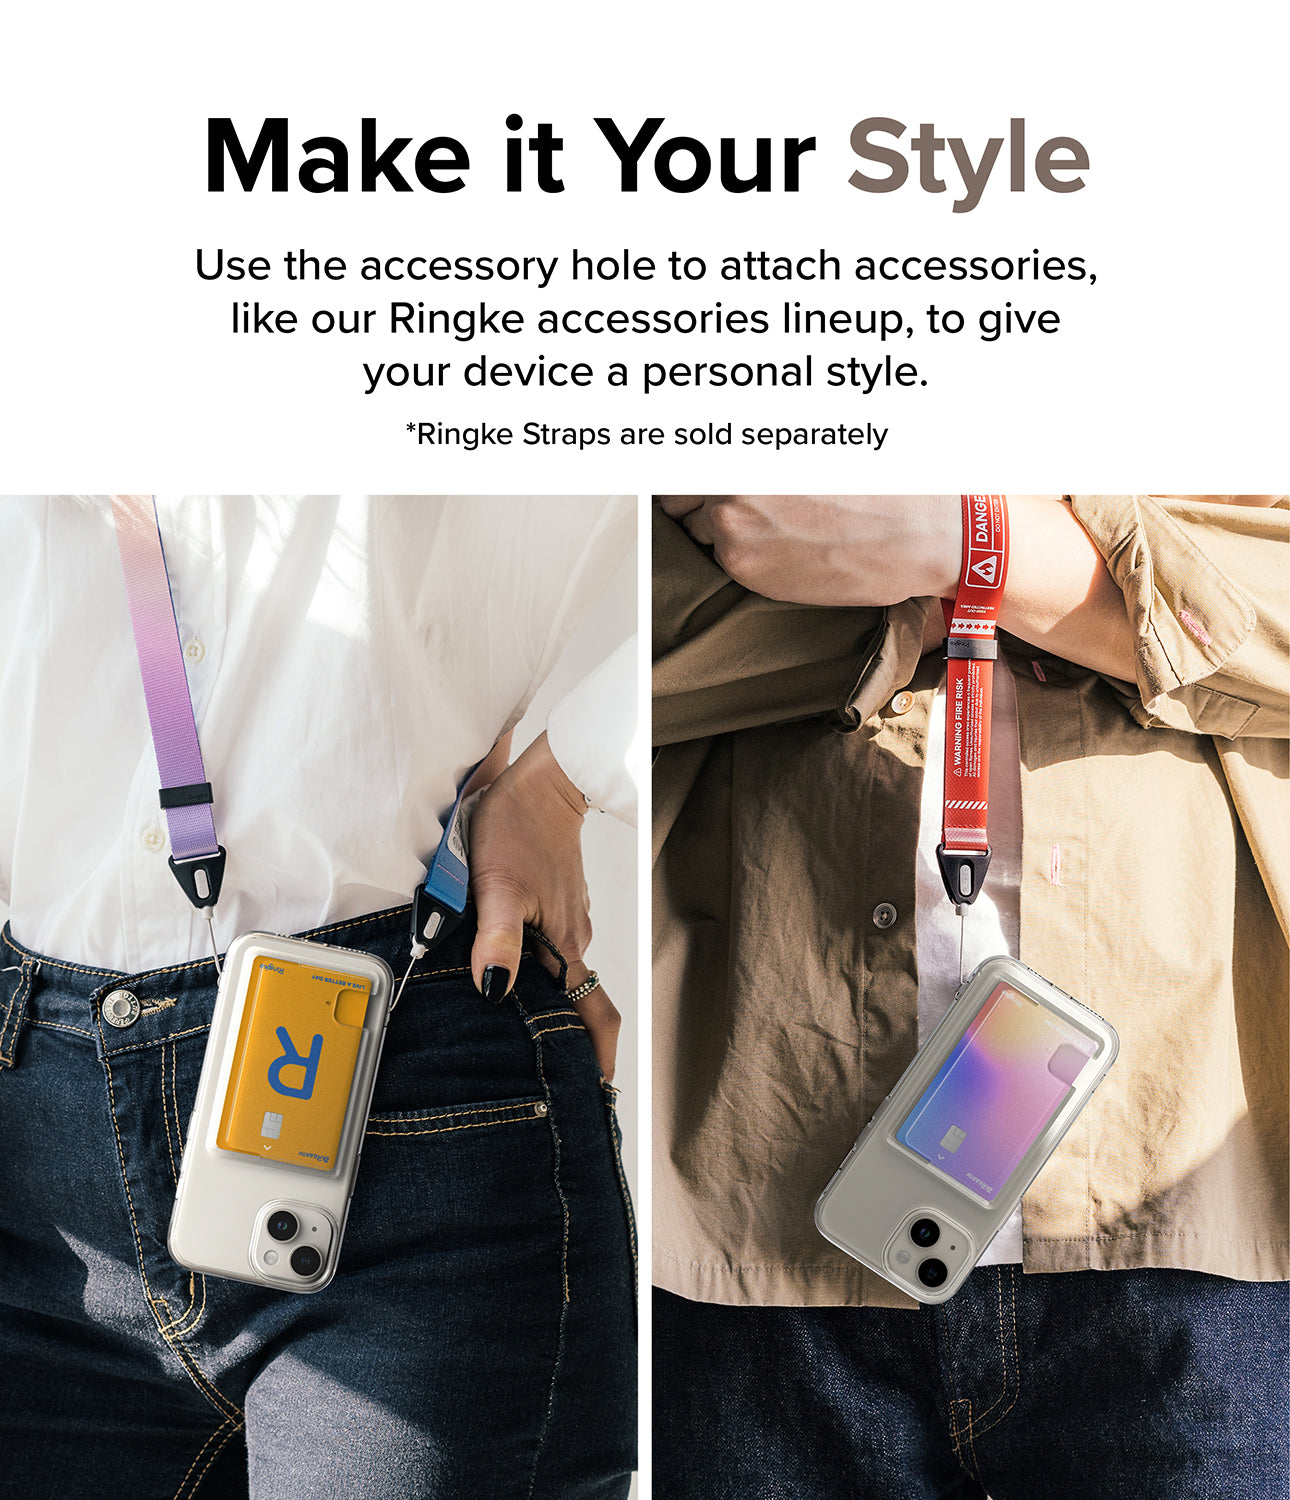 iPhone 15 Case | Fusion Card - Make it Your Style. Use the accessory hole to attach accessories, like our Ringke accessories lineup, to give your device a personal style.